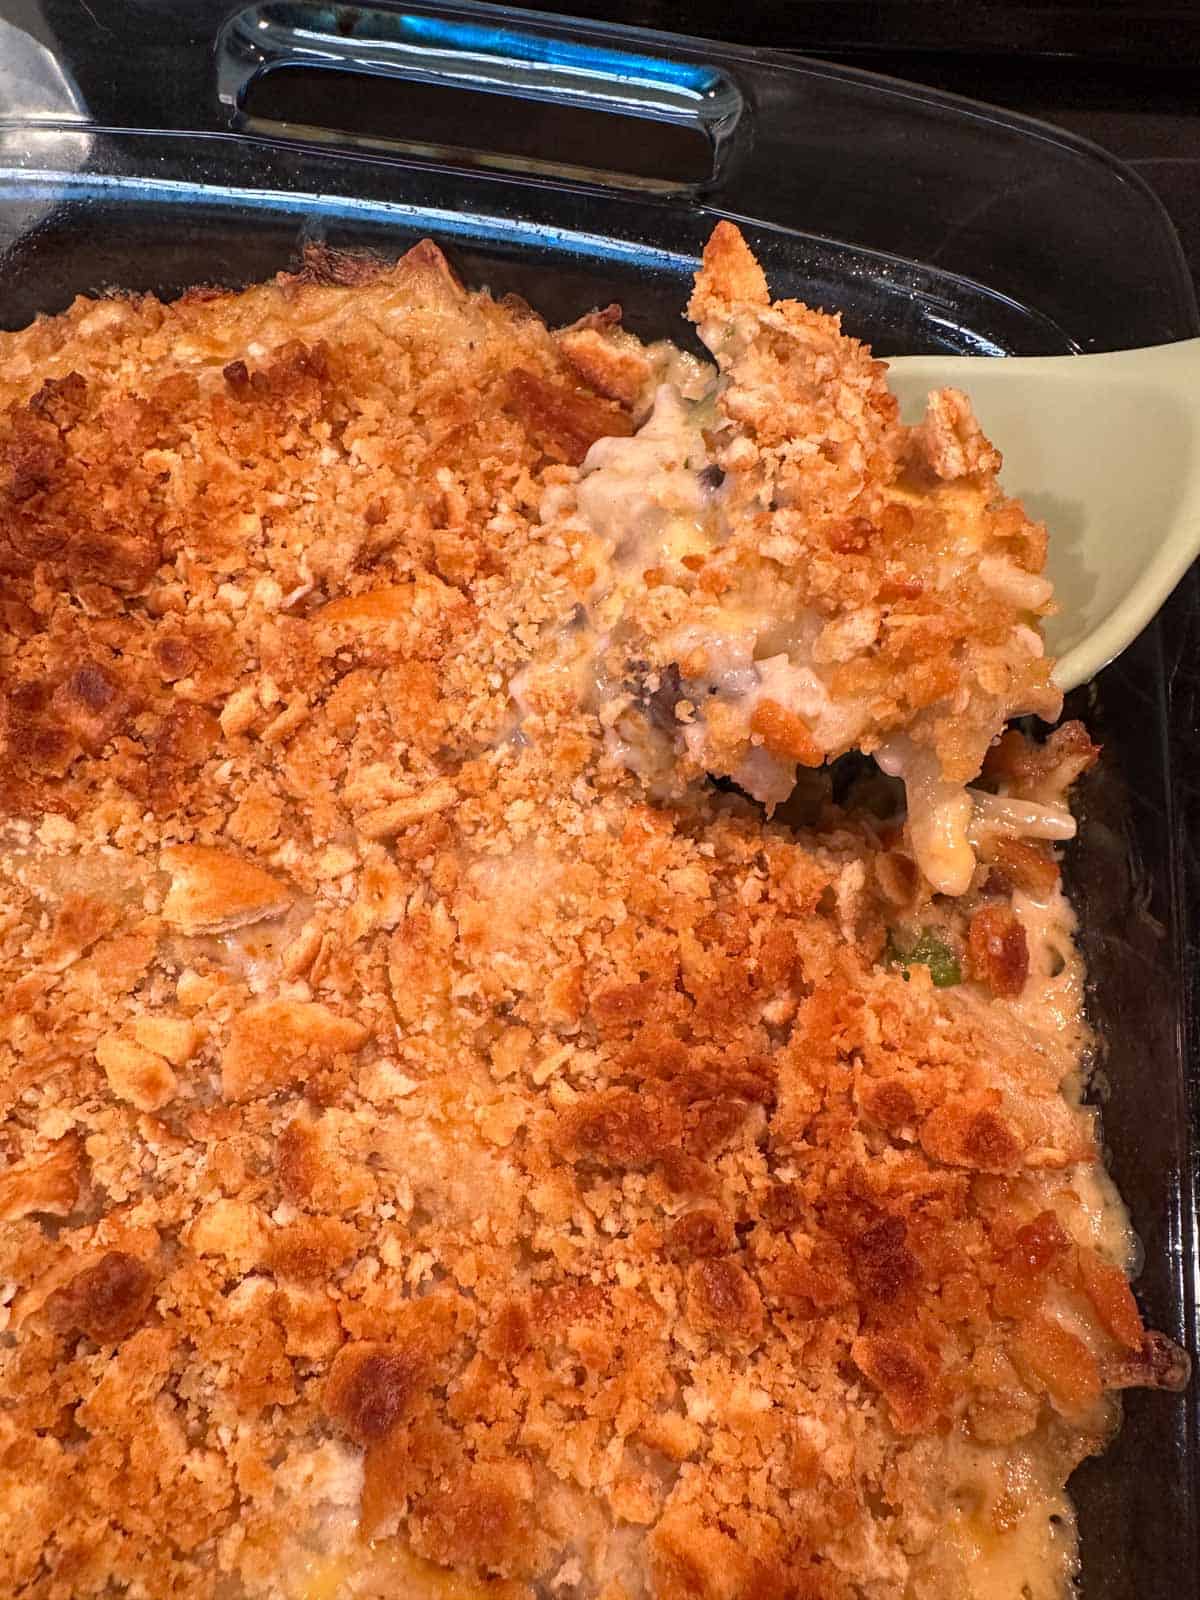 A large casserole dish containing a cheesy shredded hash brown mixture topped by crushed Ritz crackers which has just come out of the oven. There is a blue spoon containing some of the dish which it has scooped up.